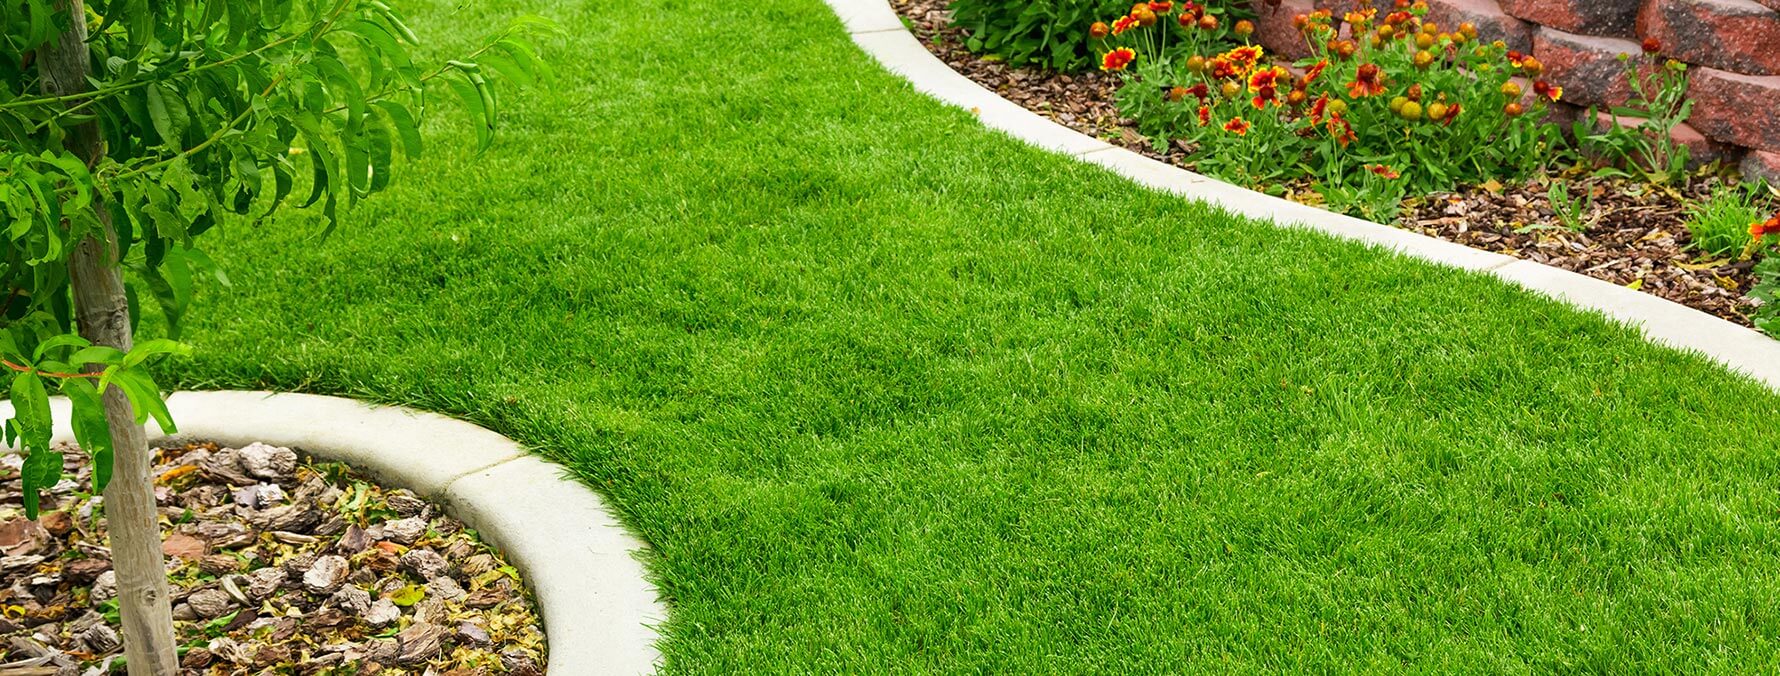 These fertilizers provide the basic elements needed for good lawn and garden care. Each provides a balanced blend of nutrients and ingredients to promote healthy plant growth. They can be used in all areas of the country.